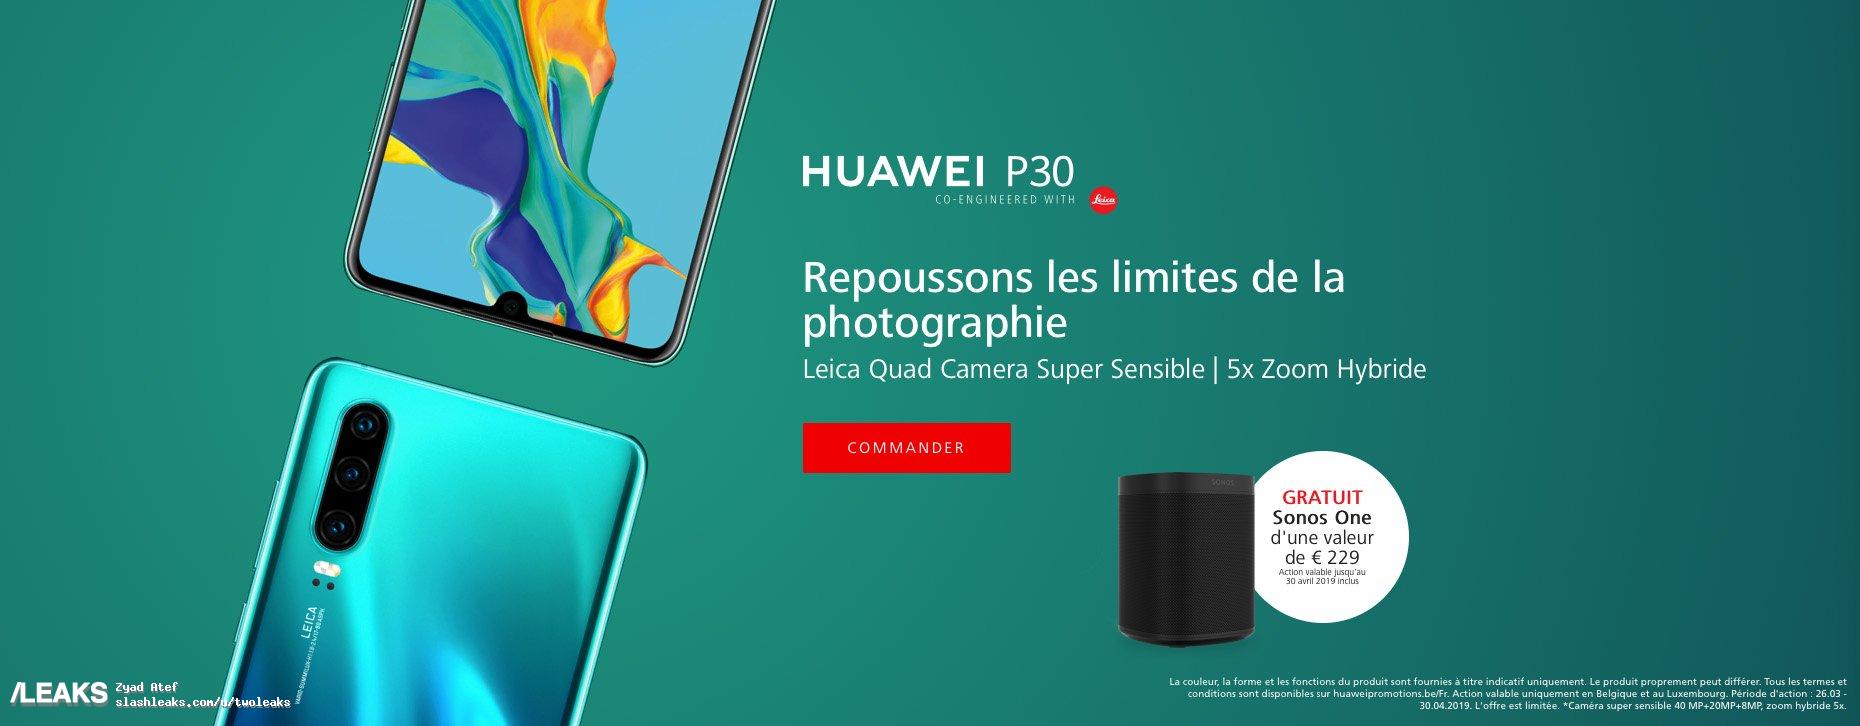 Huawei P30 and P30 Pro marketing material shows up ahead of launch - NotebookCheck.net News